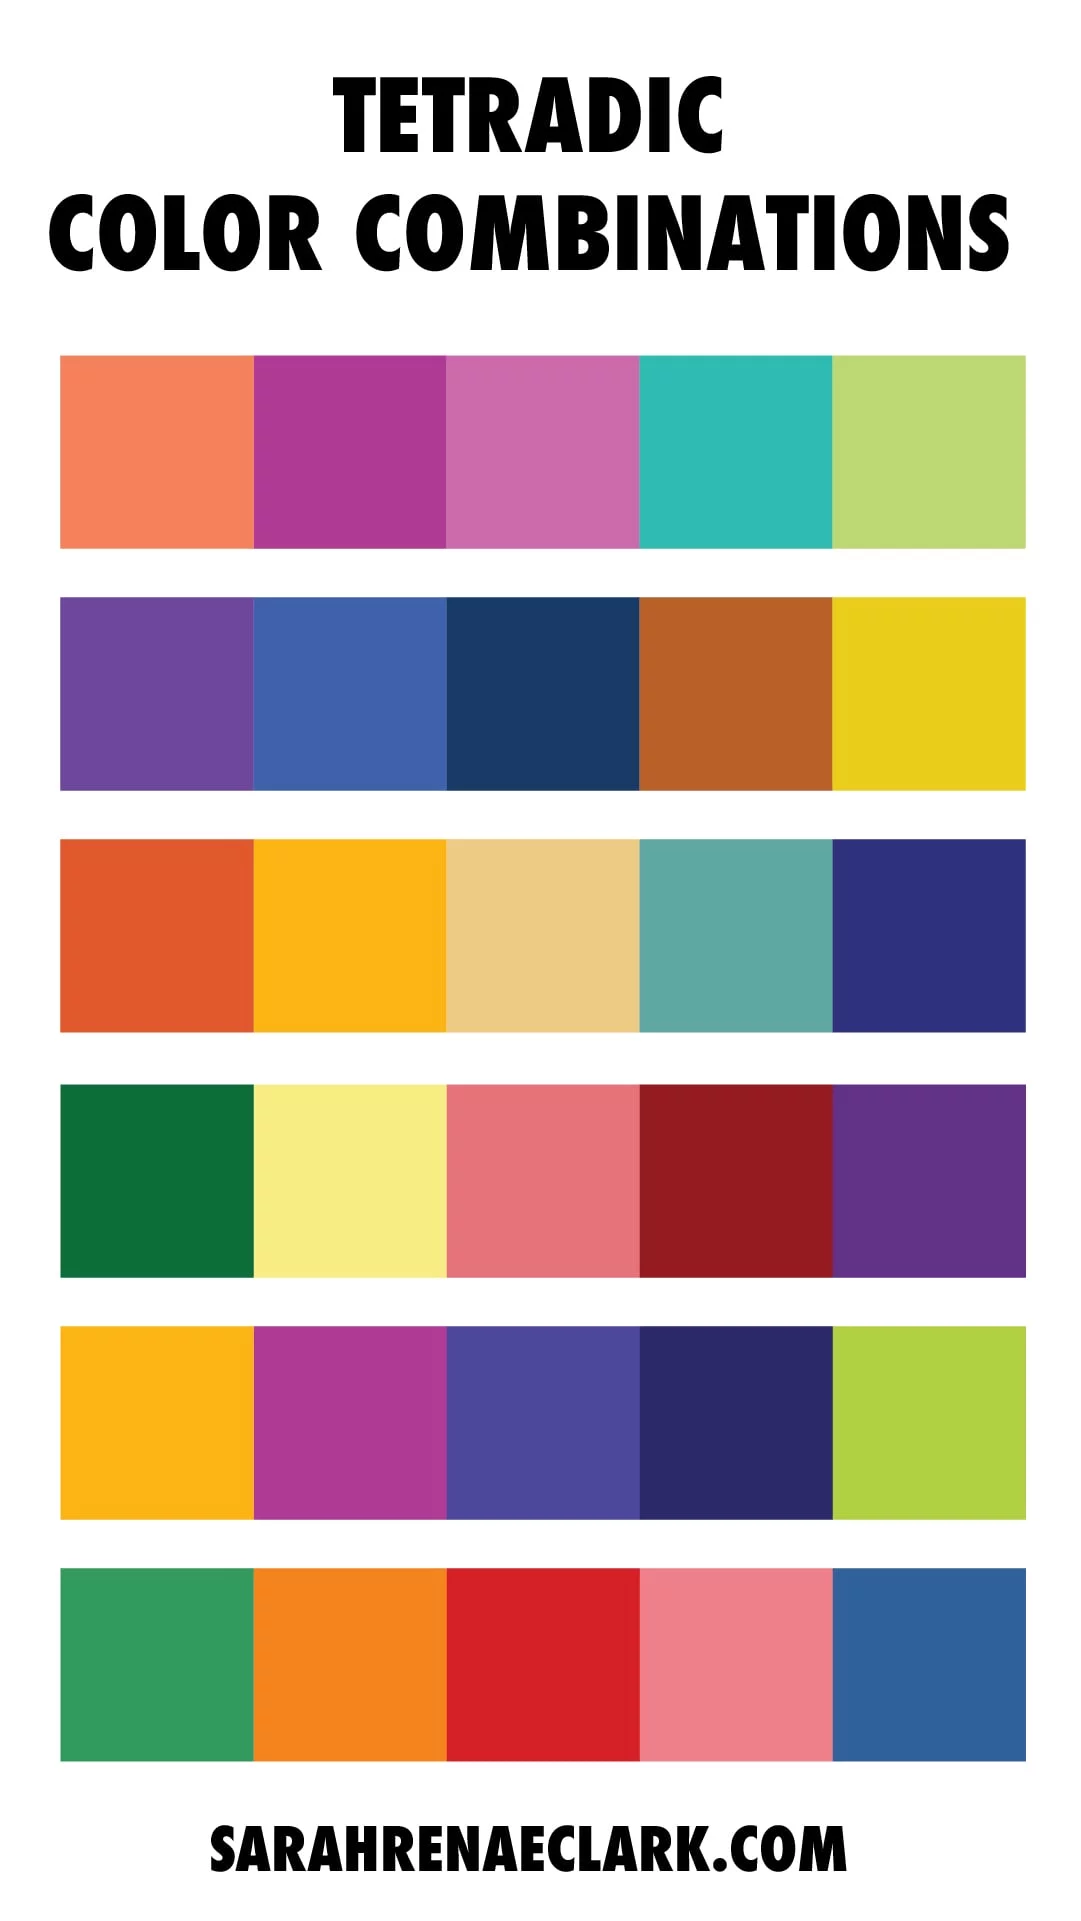 Learning colors! @Sarah Renae Clark #colors #colorcombos